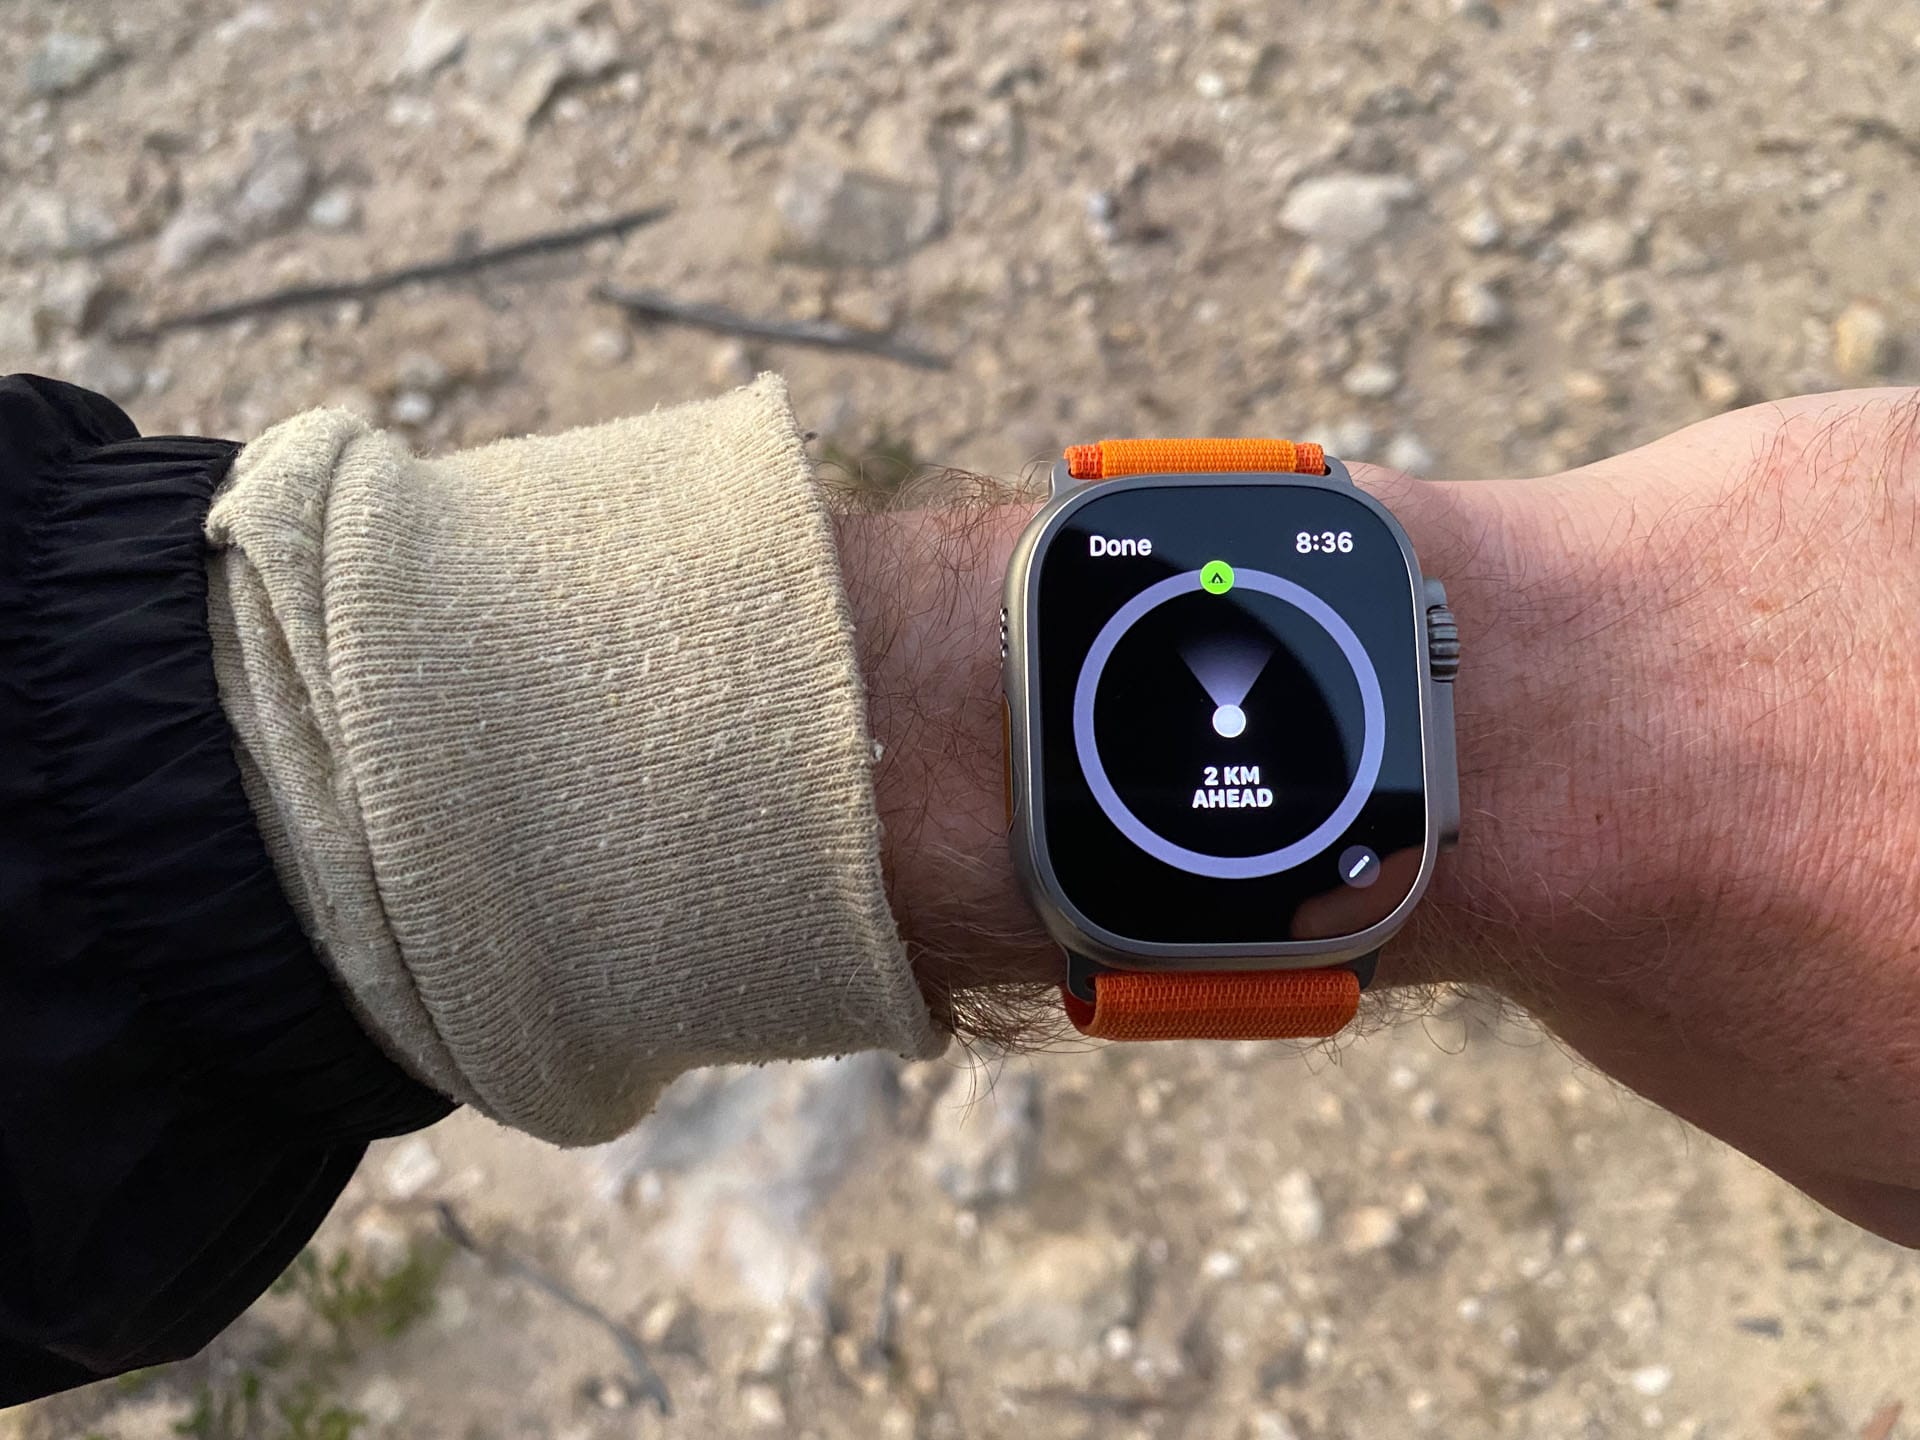 How accurate is the Apple Watch's step counter and distance tracking? - CNET